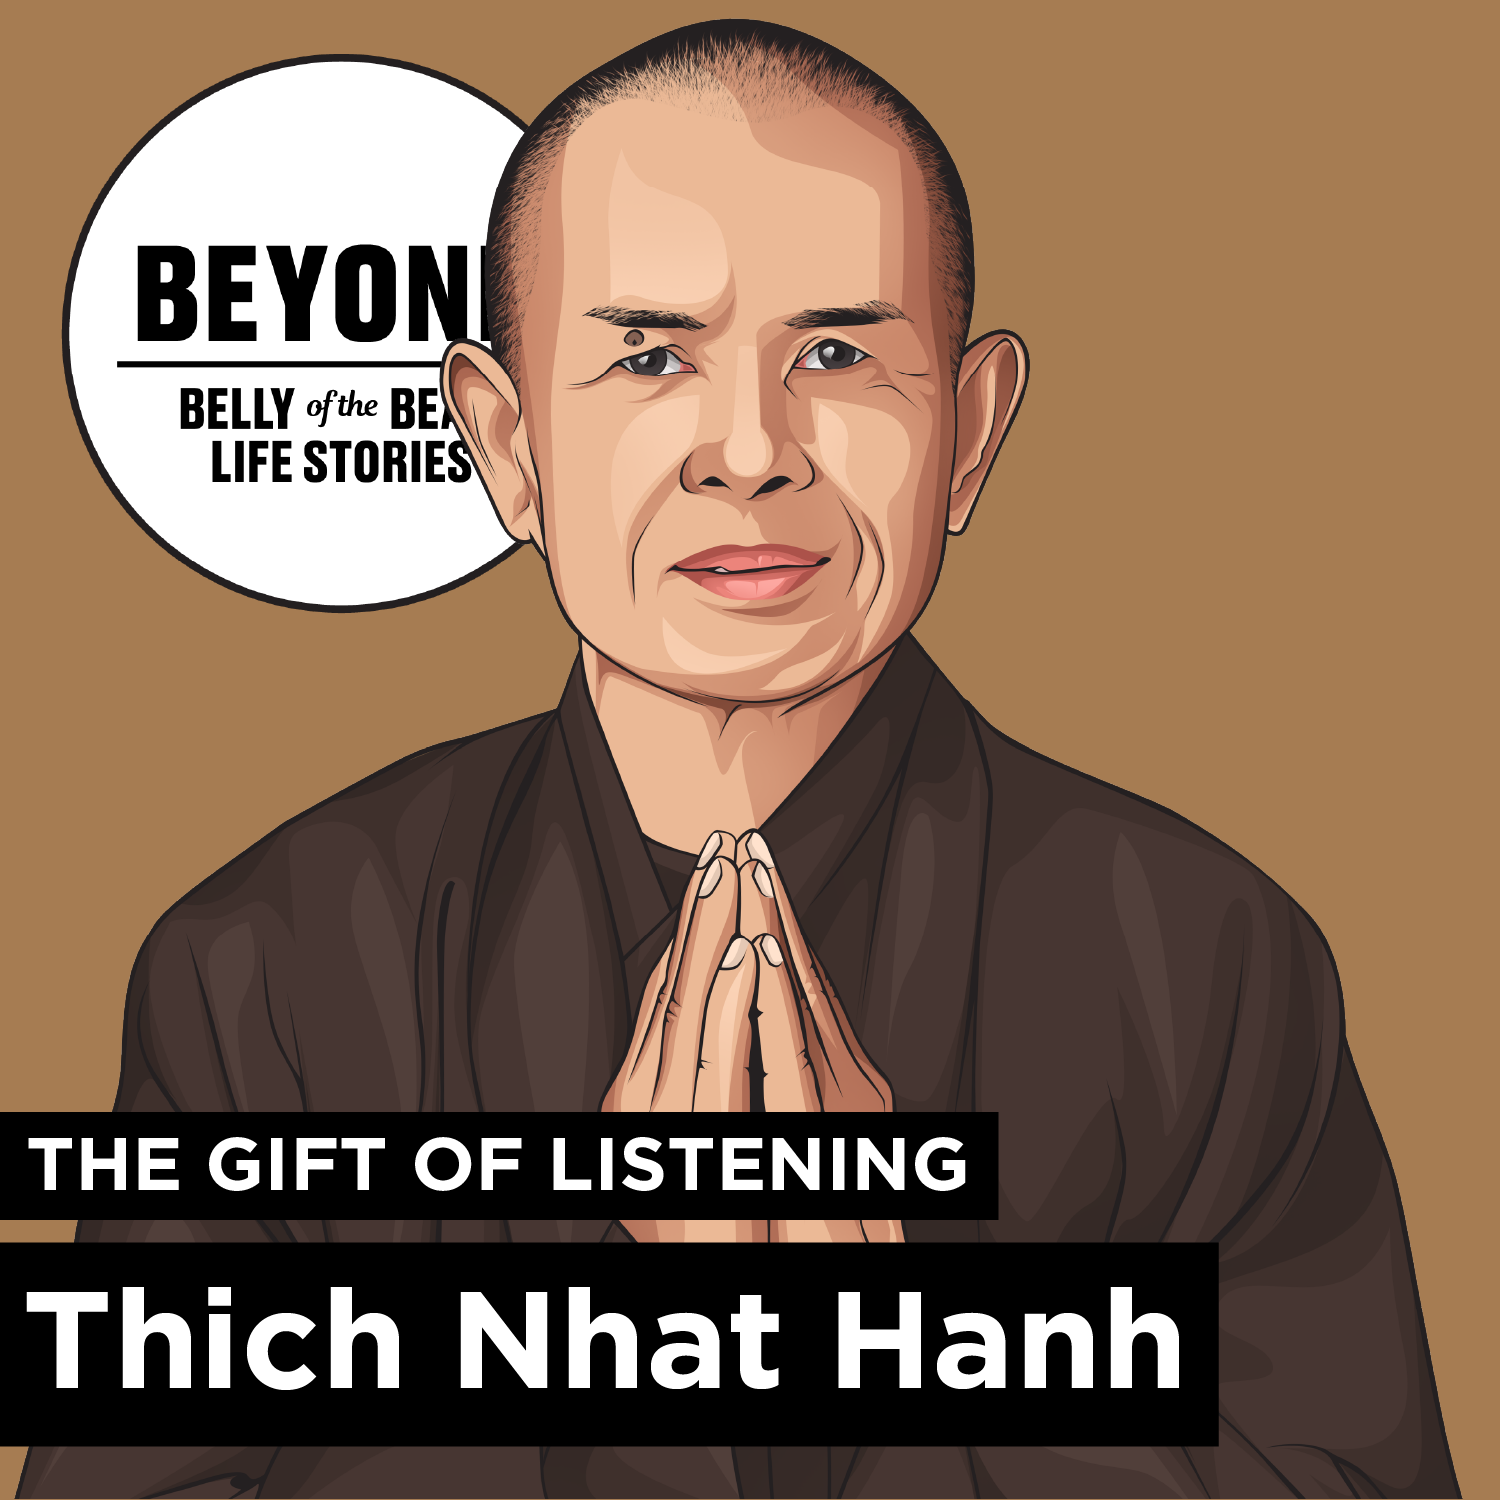 Beyond: The Gift of Listening and Thich Nhat Hanh